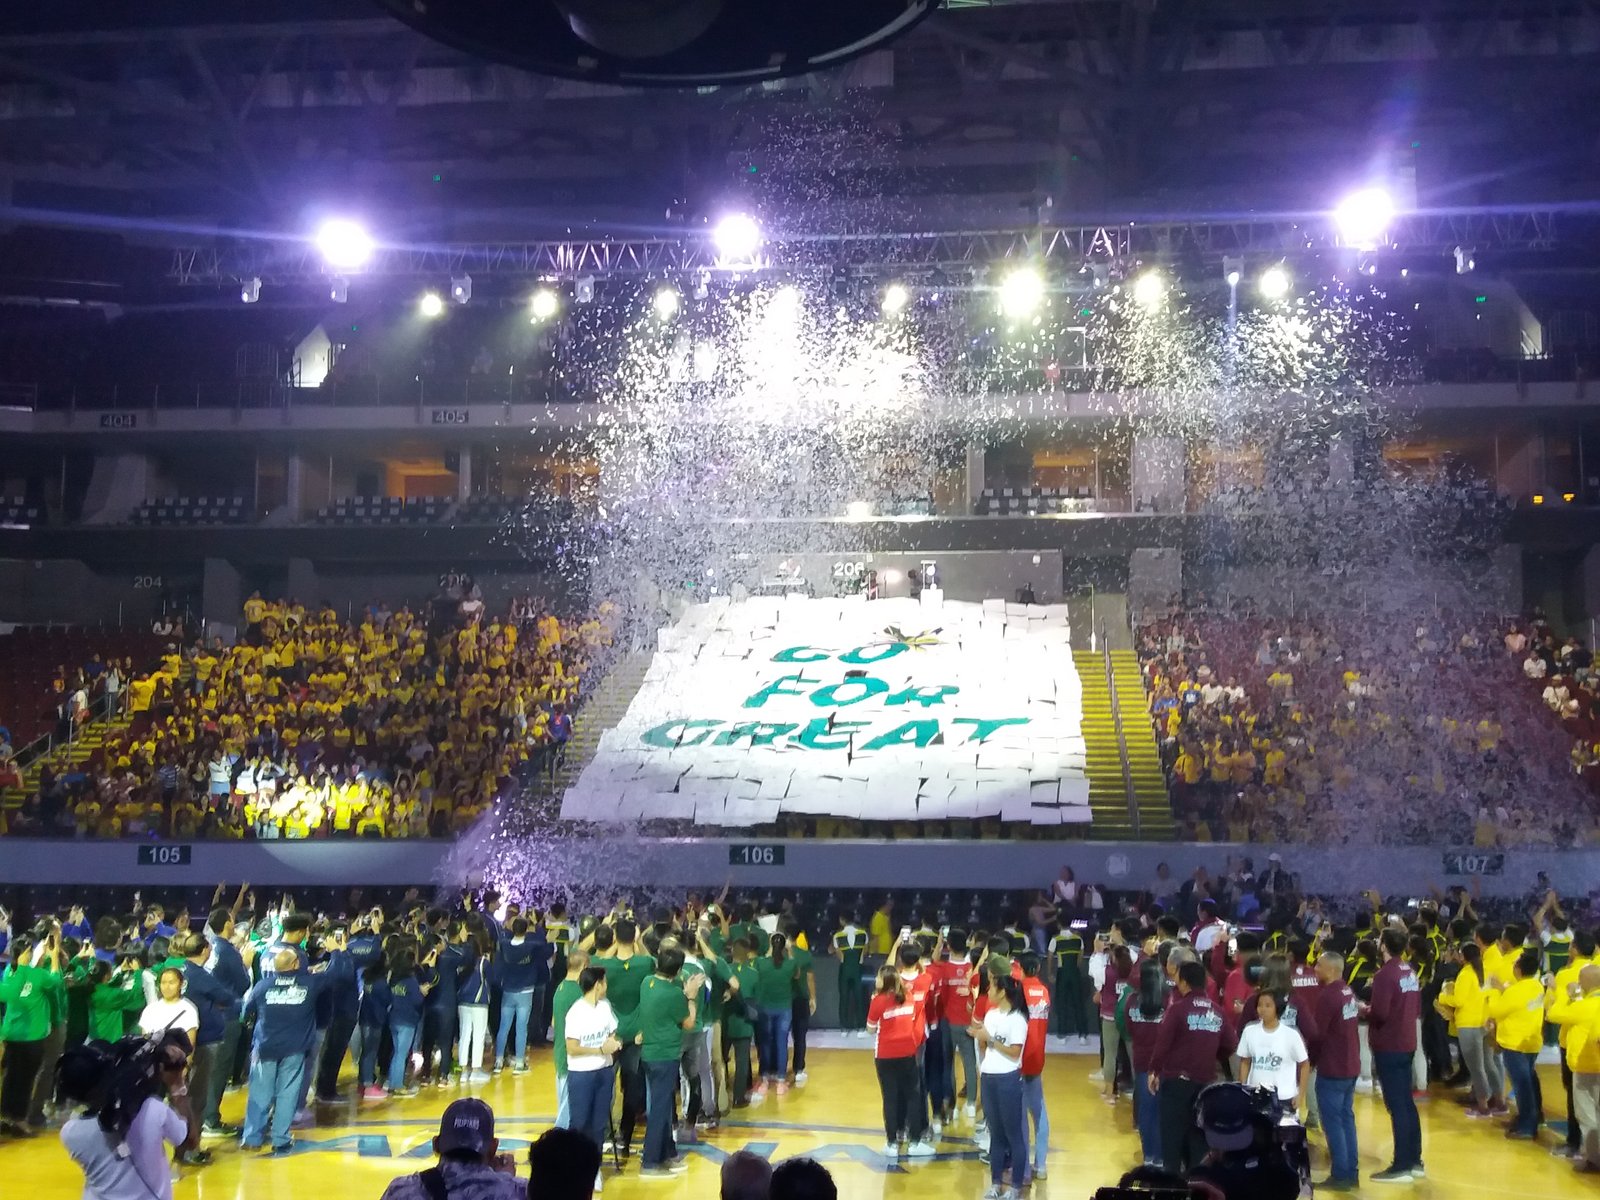 UAAP to leave ABS-CBN? New broadcast deal yet to be reached- report